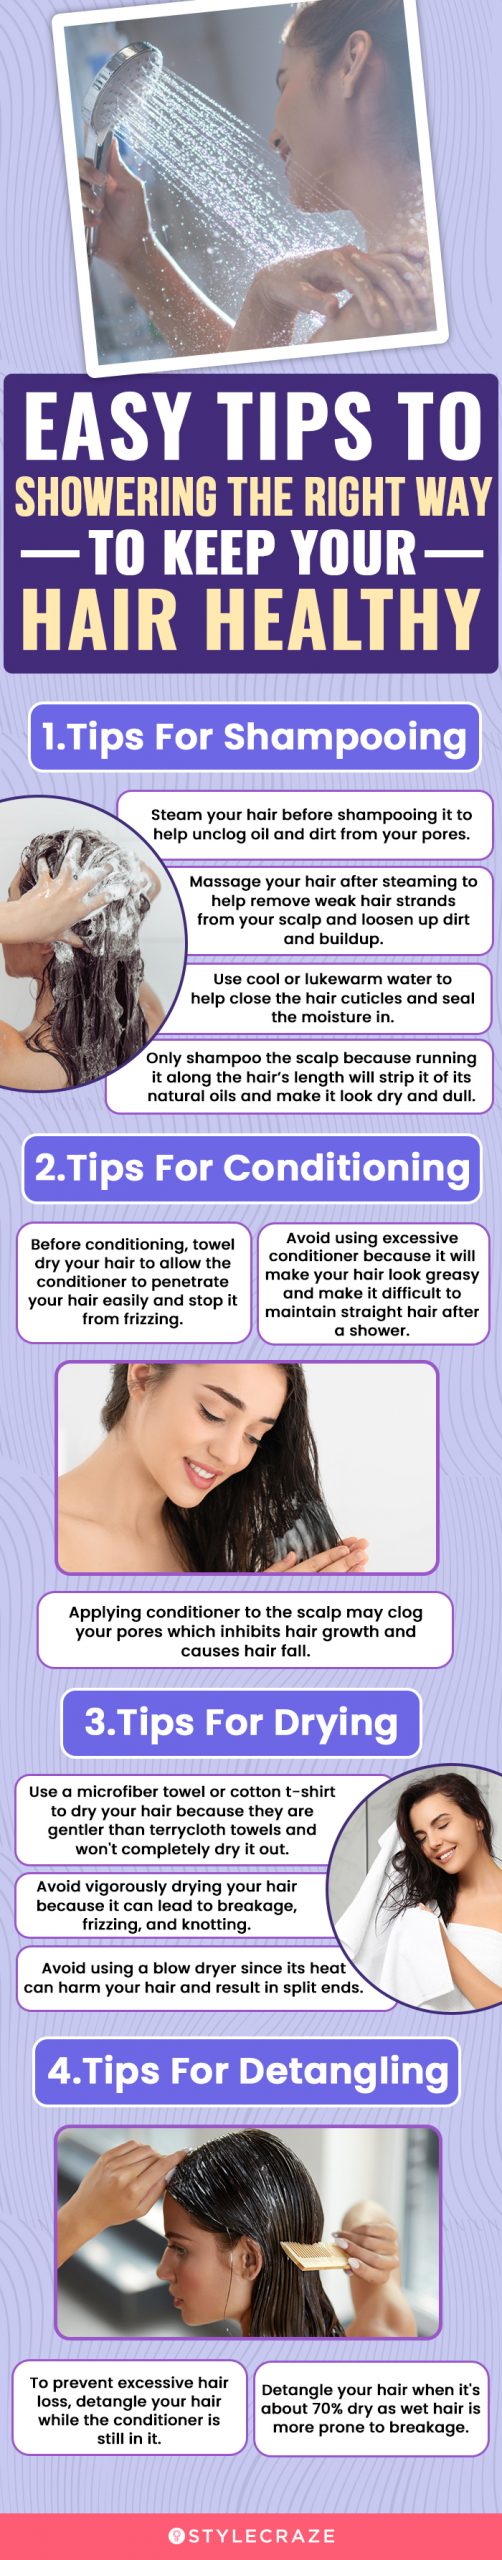 easy tips to showering the right way to keep your hair healthy (infographic)